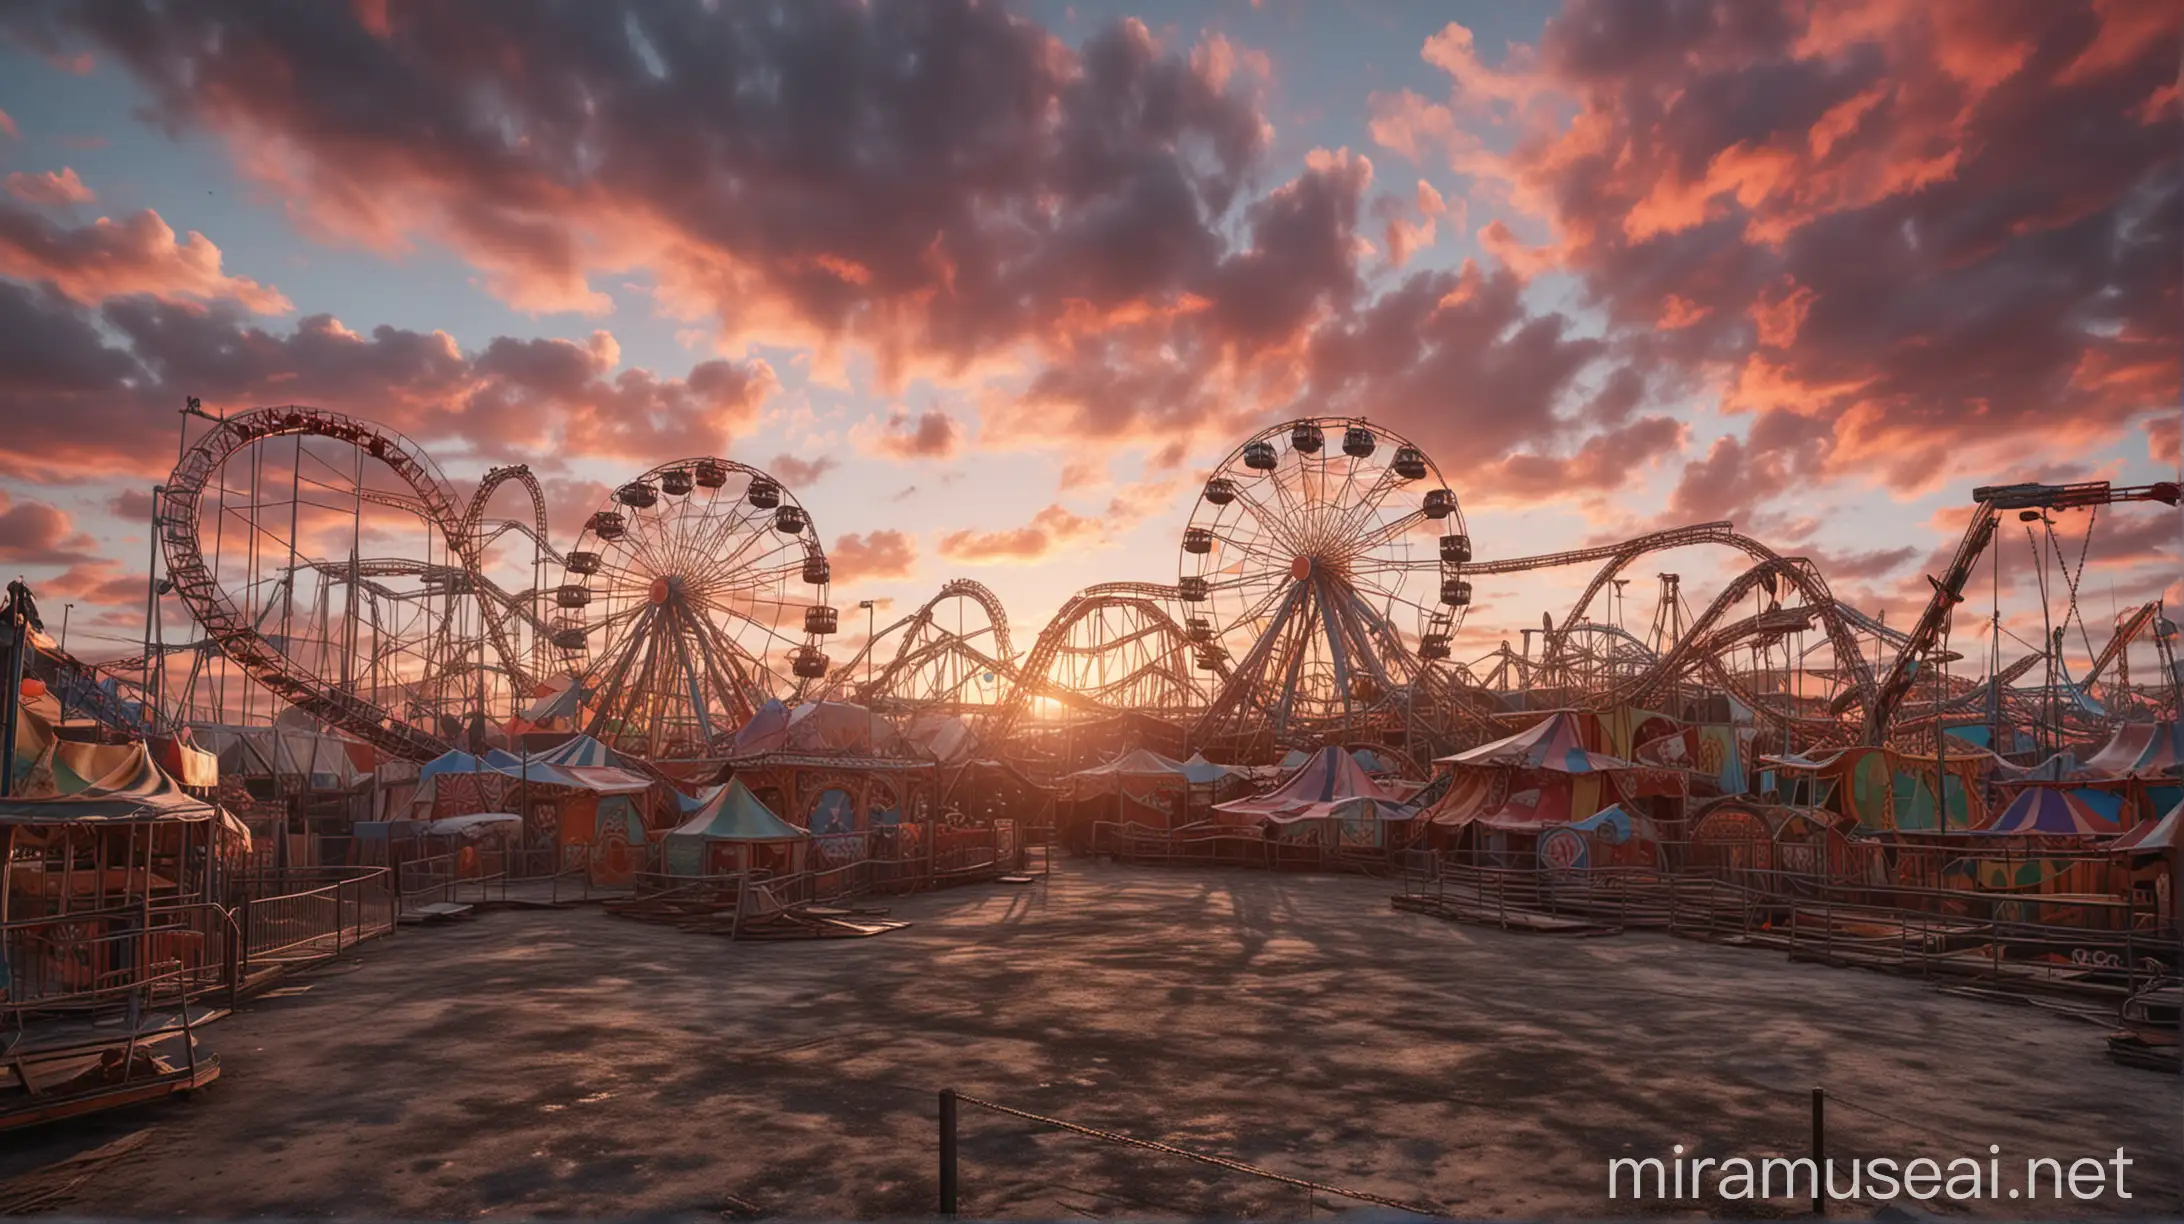 Desolate Sunset Carnival Abandoned Rollercoasters Amidst Misty Hyperrealism